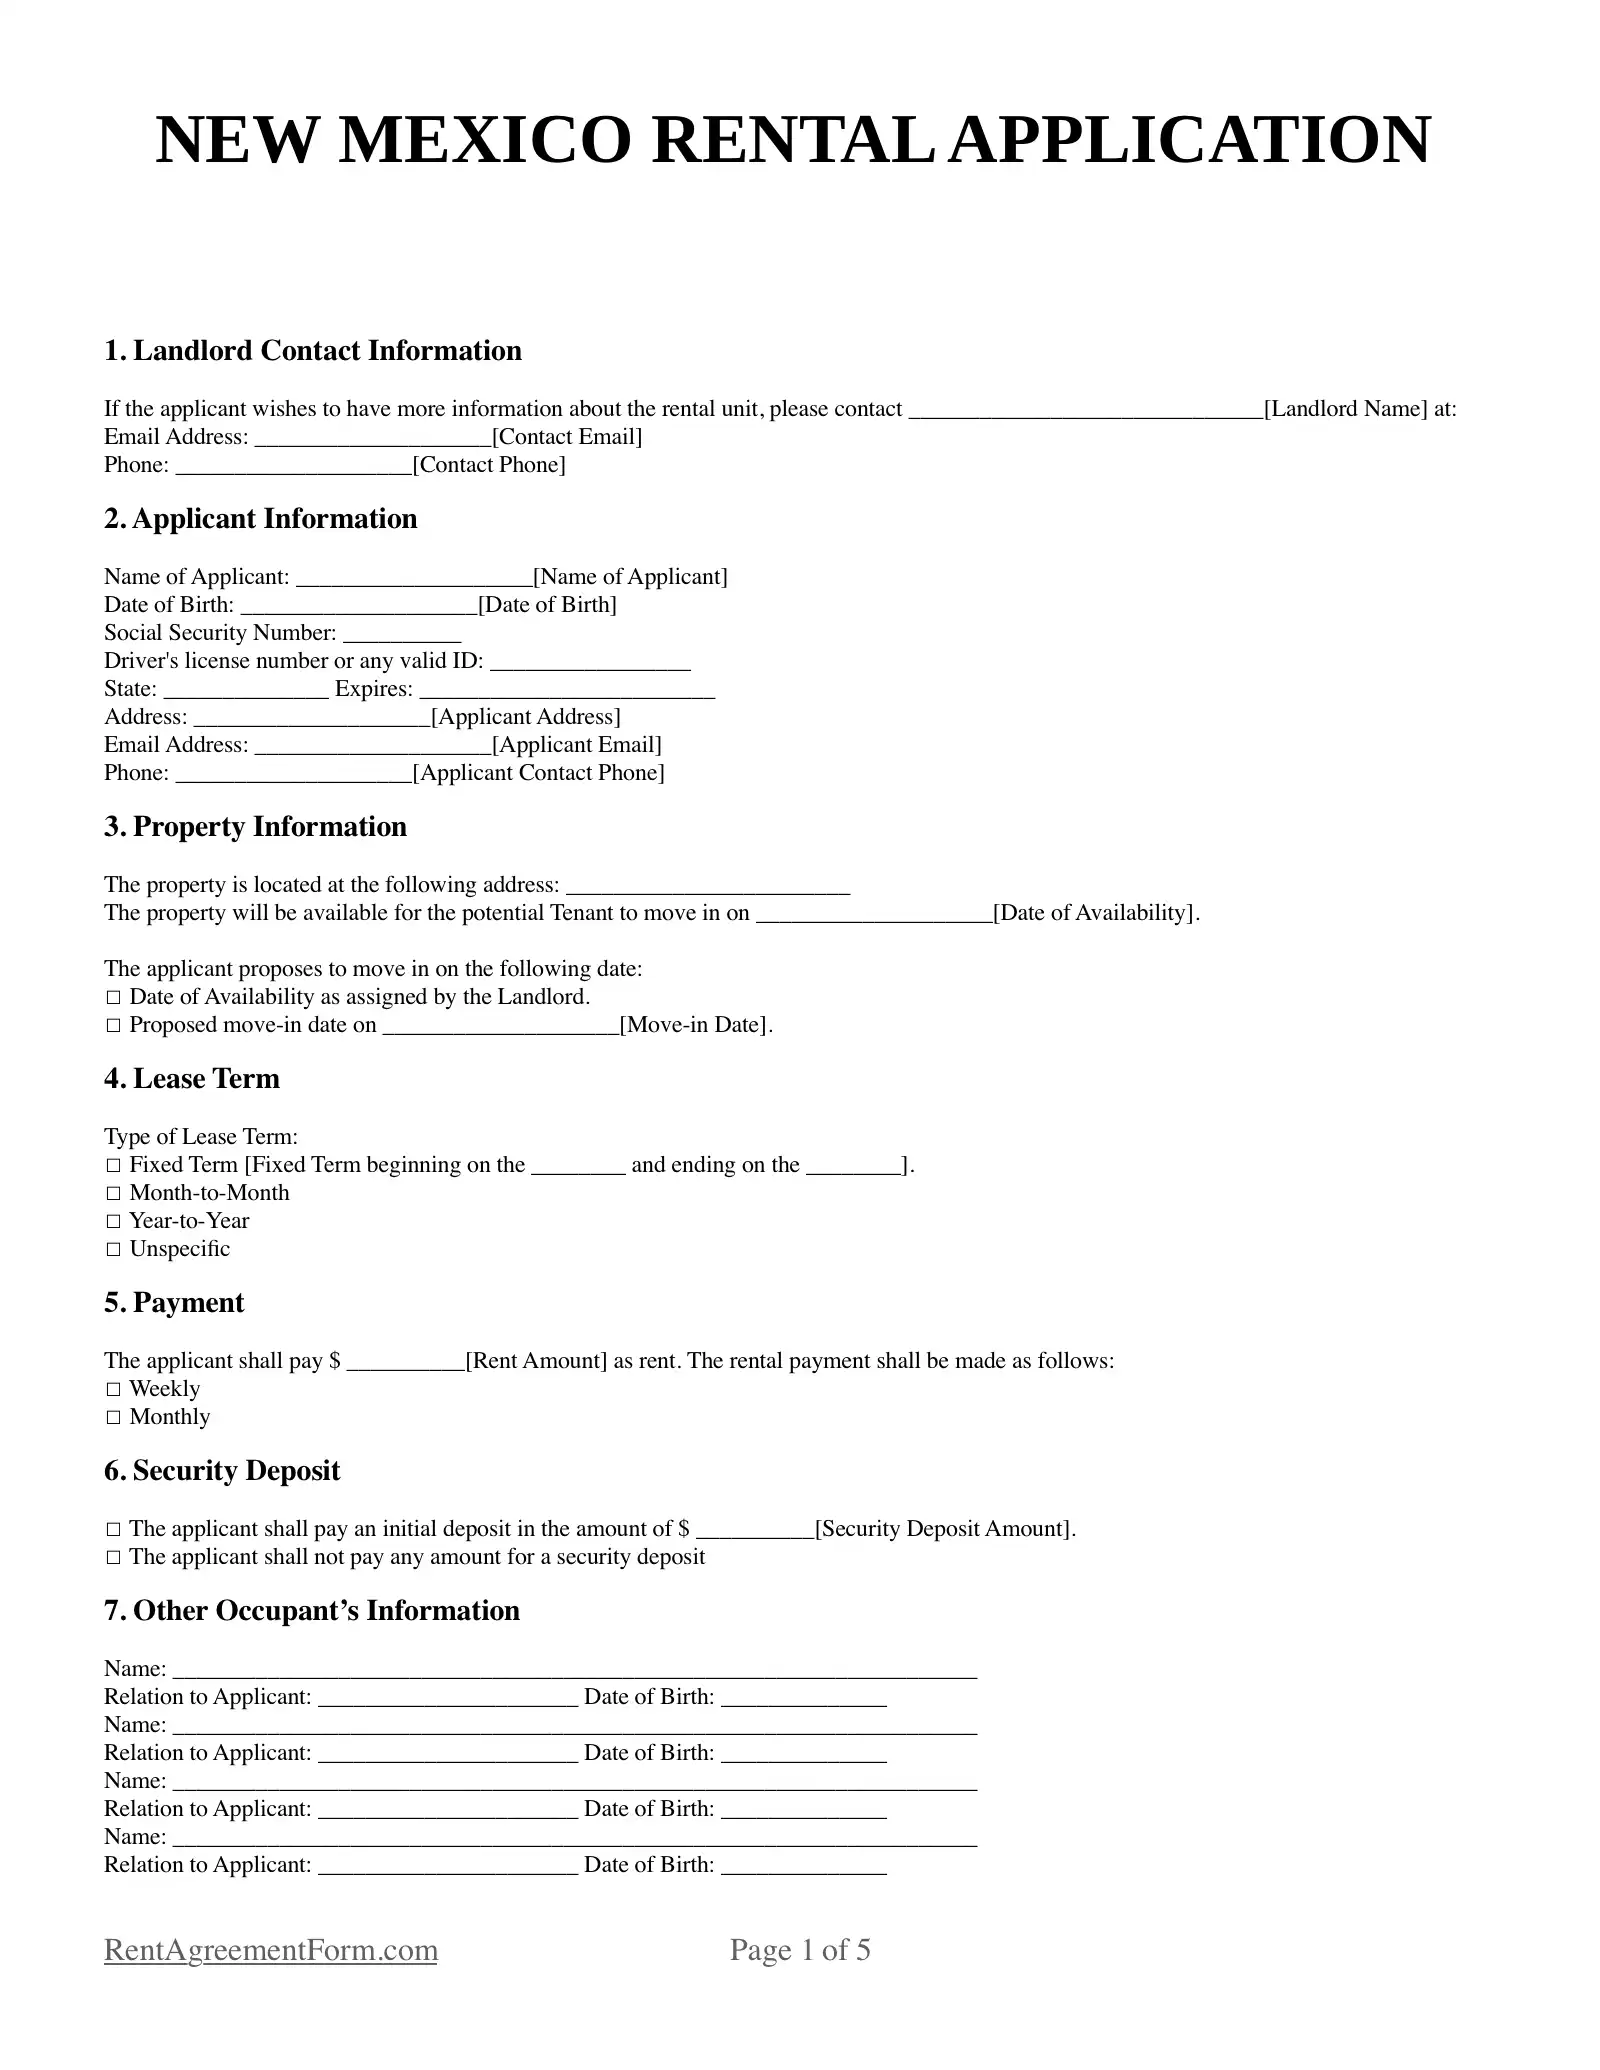 New Mexico Rental Application Sample